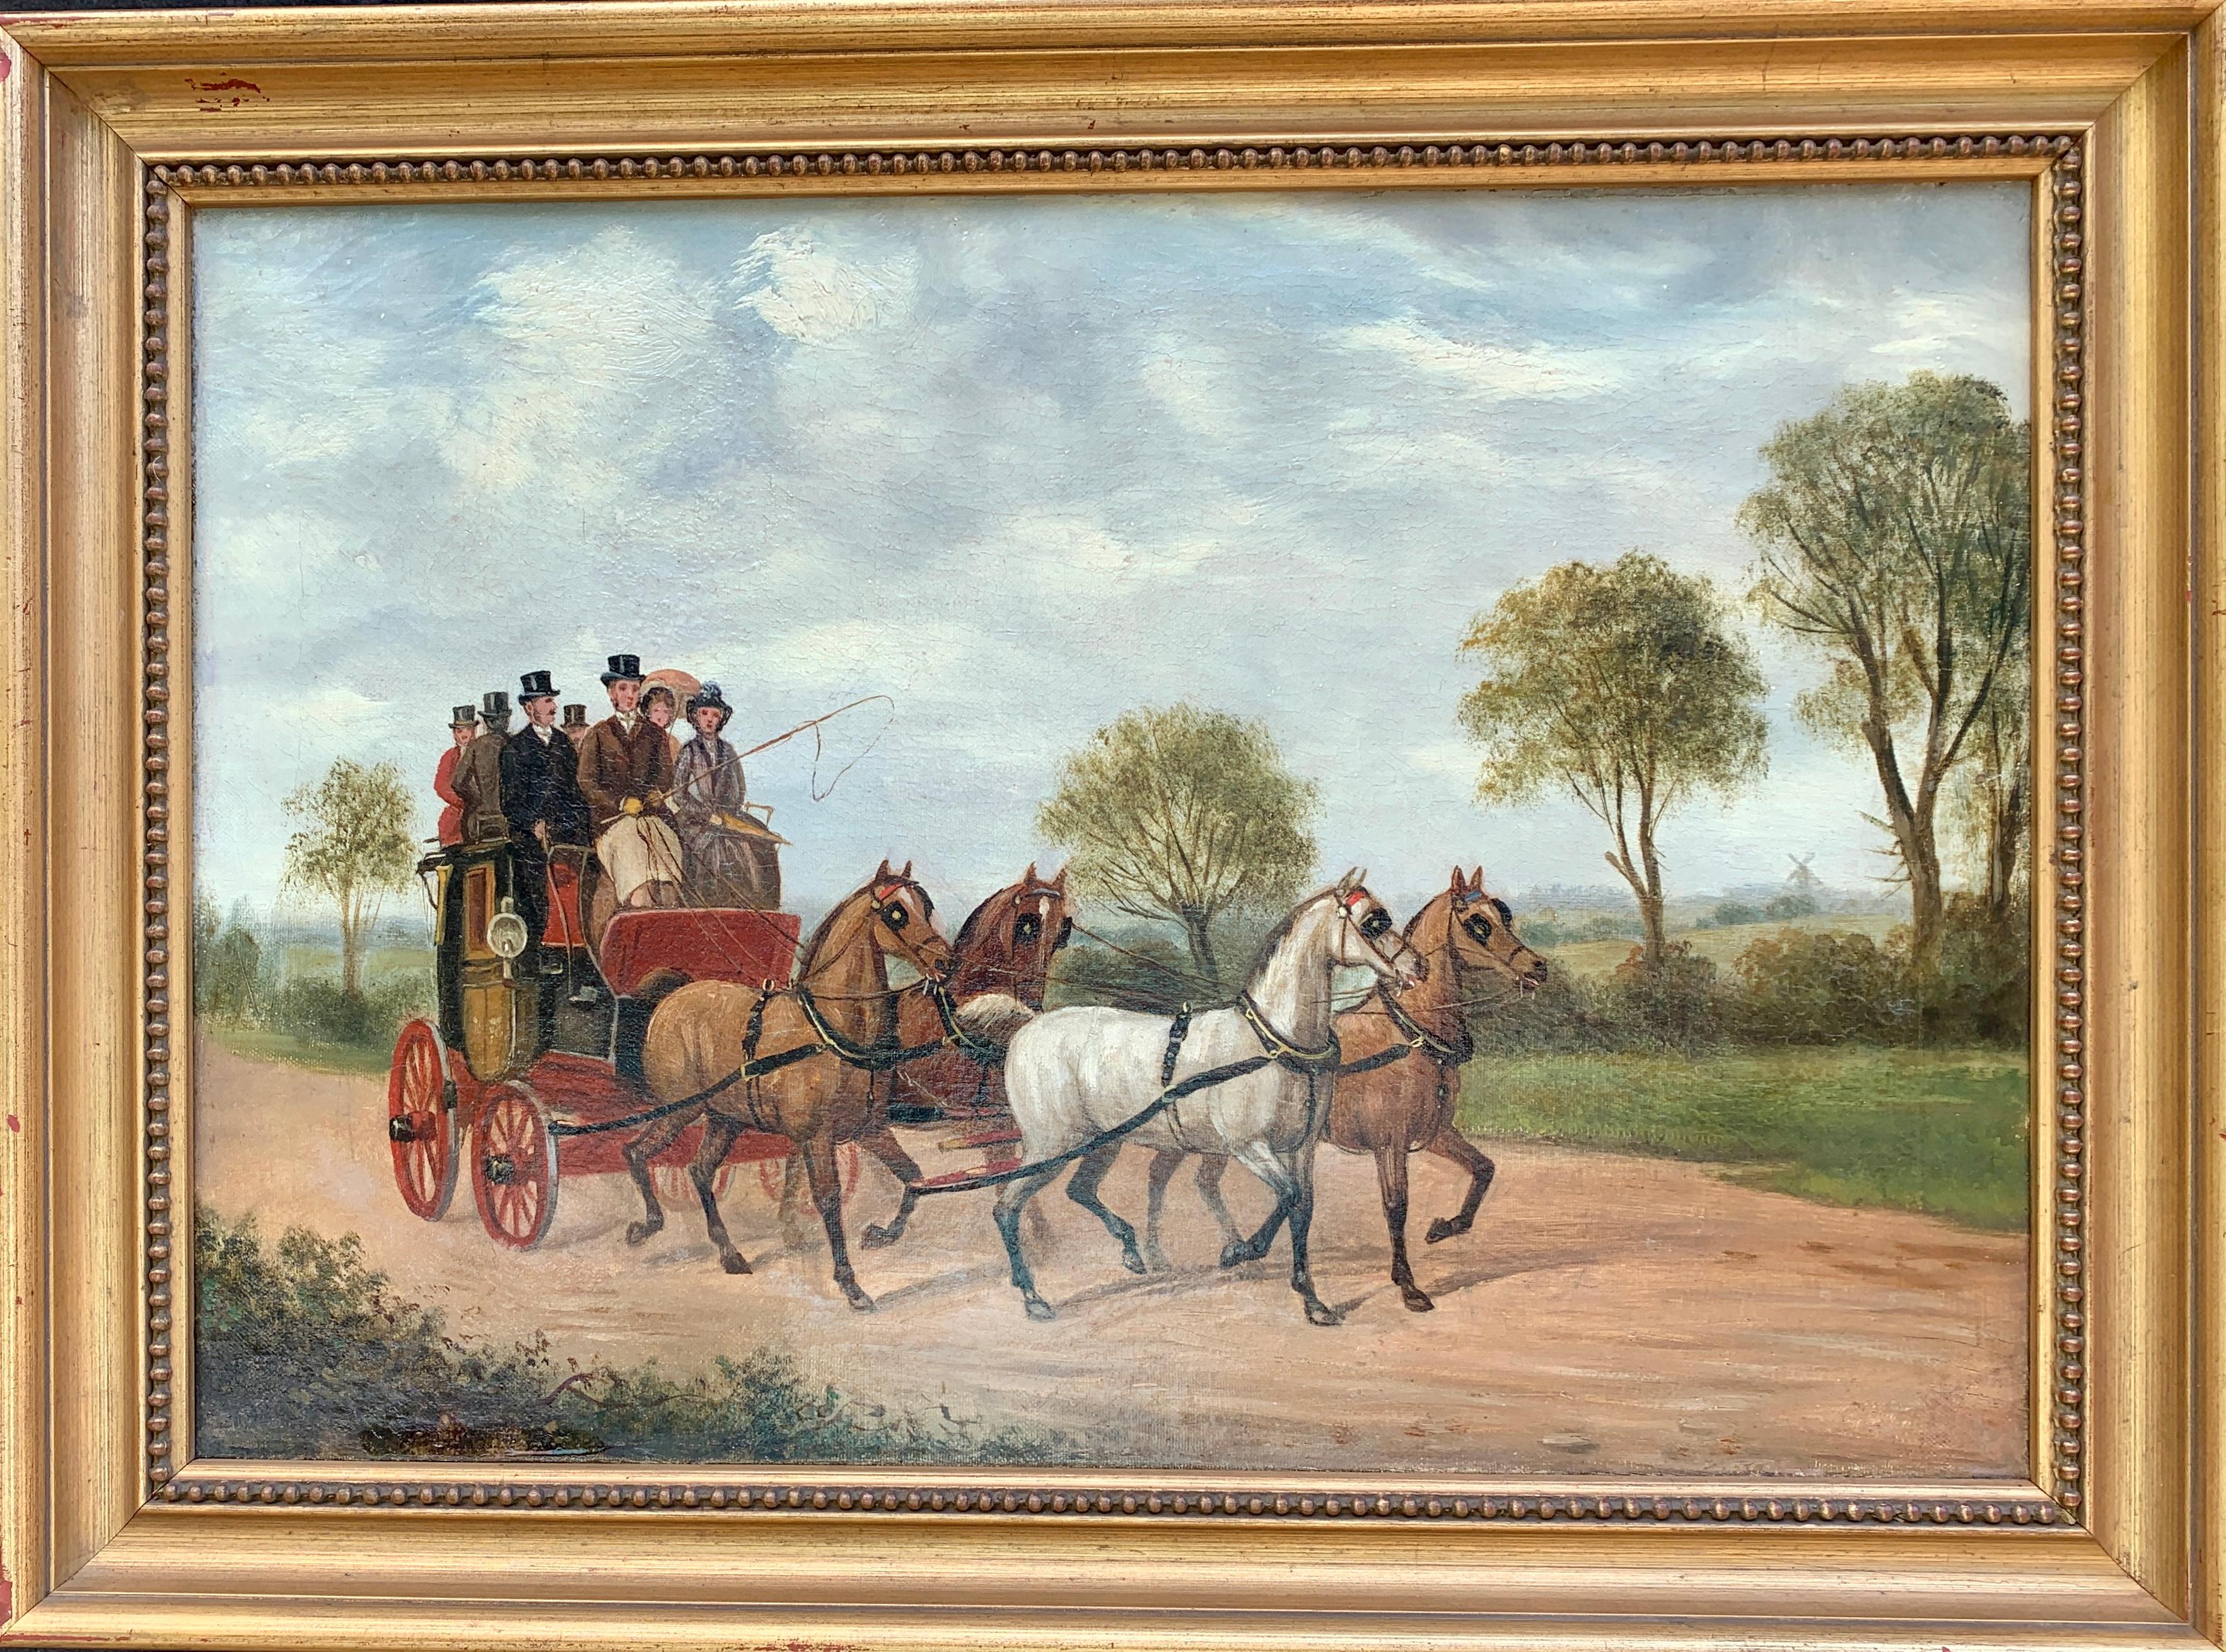 Unknown Figurative Painting - 19th century Victorian English mail coach with horses in a landscape